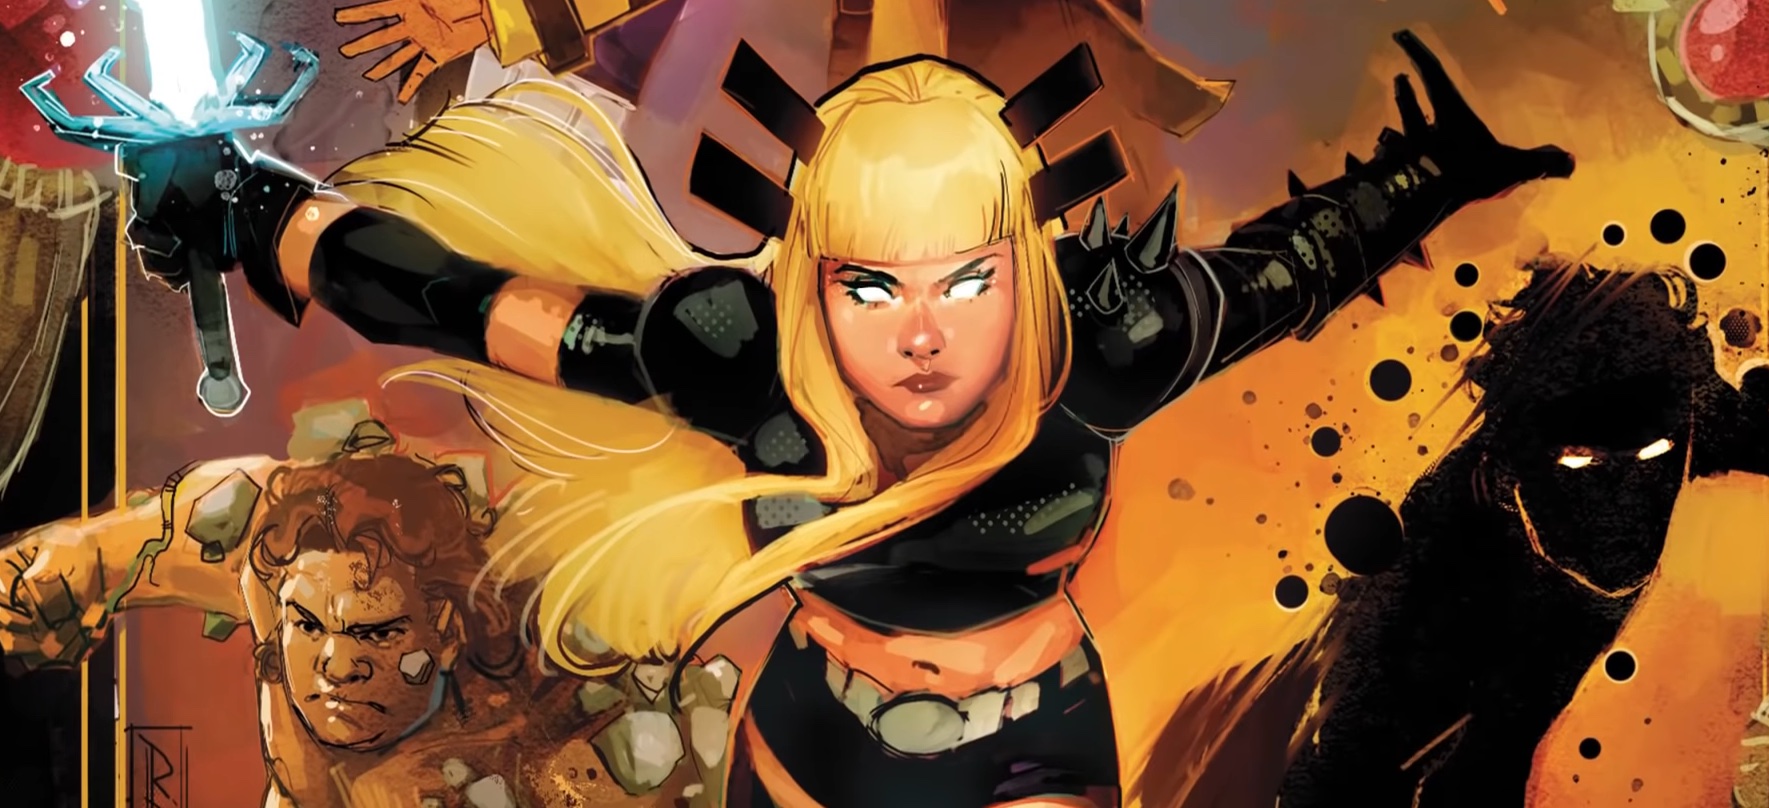 Marvel's THE NEW MUTANTS trailer is here, and get ready, it's more horror  than X-MEN